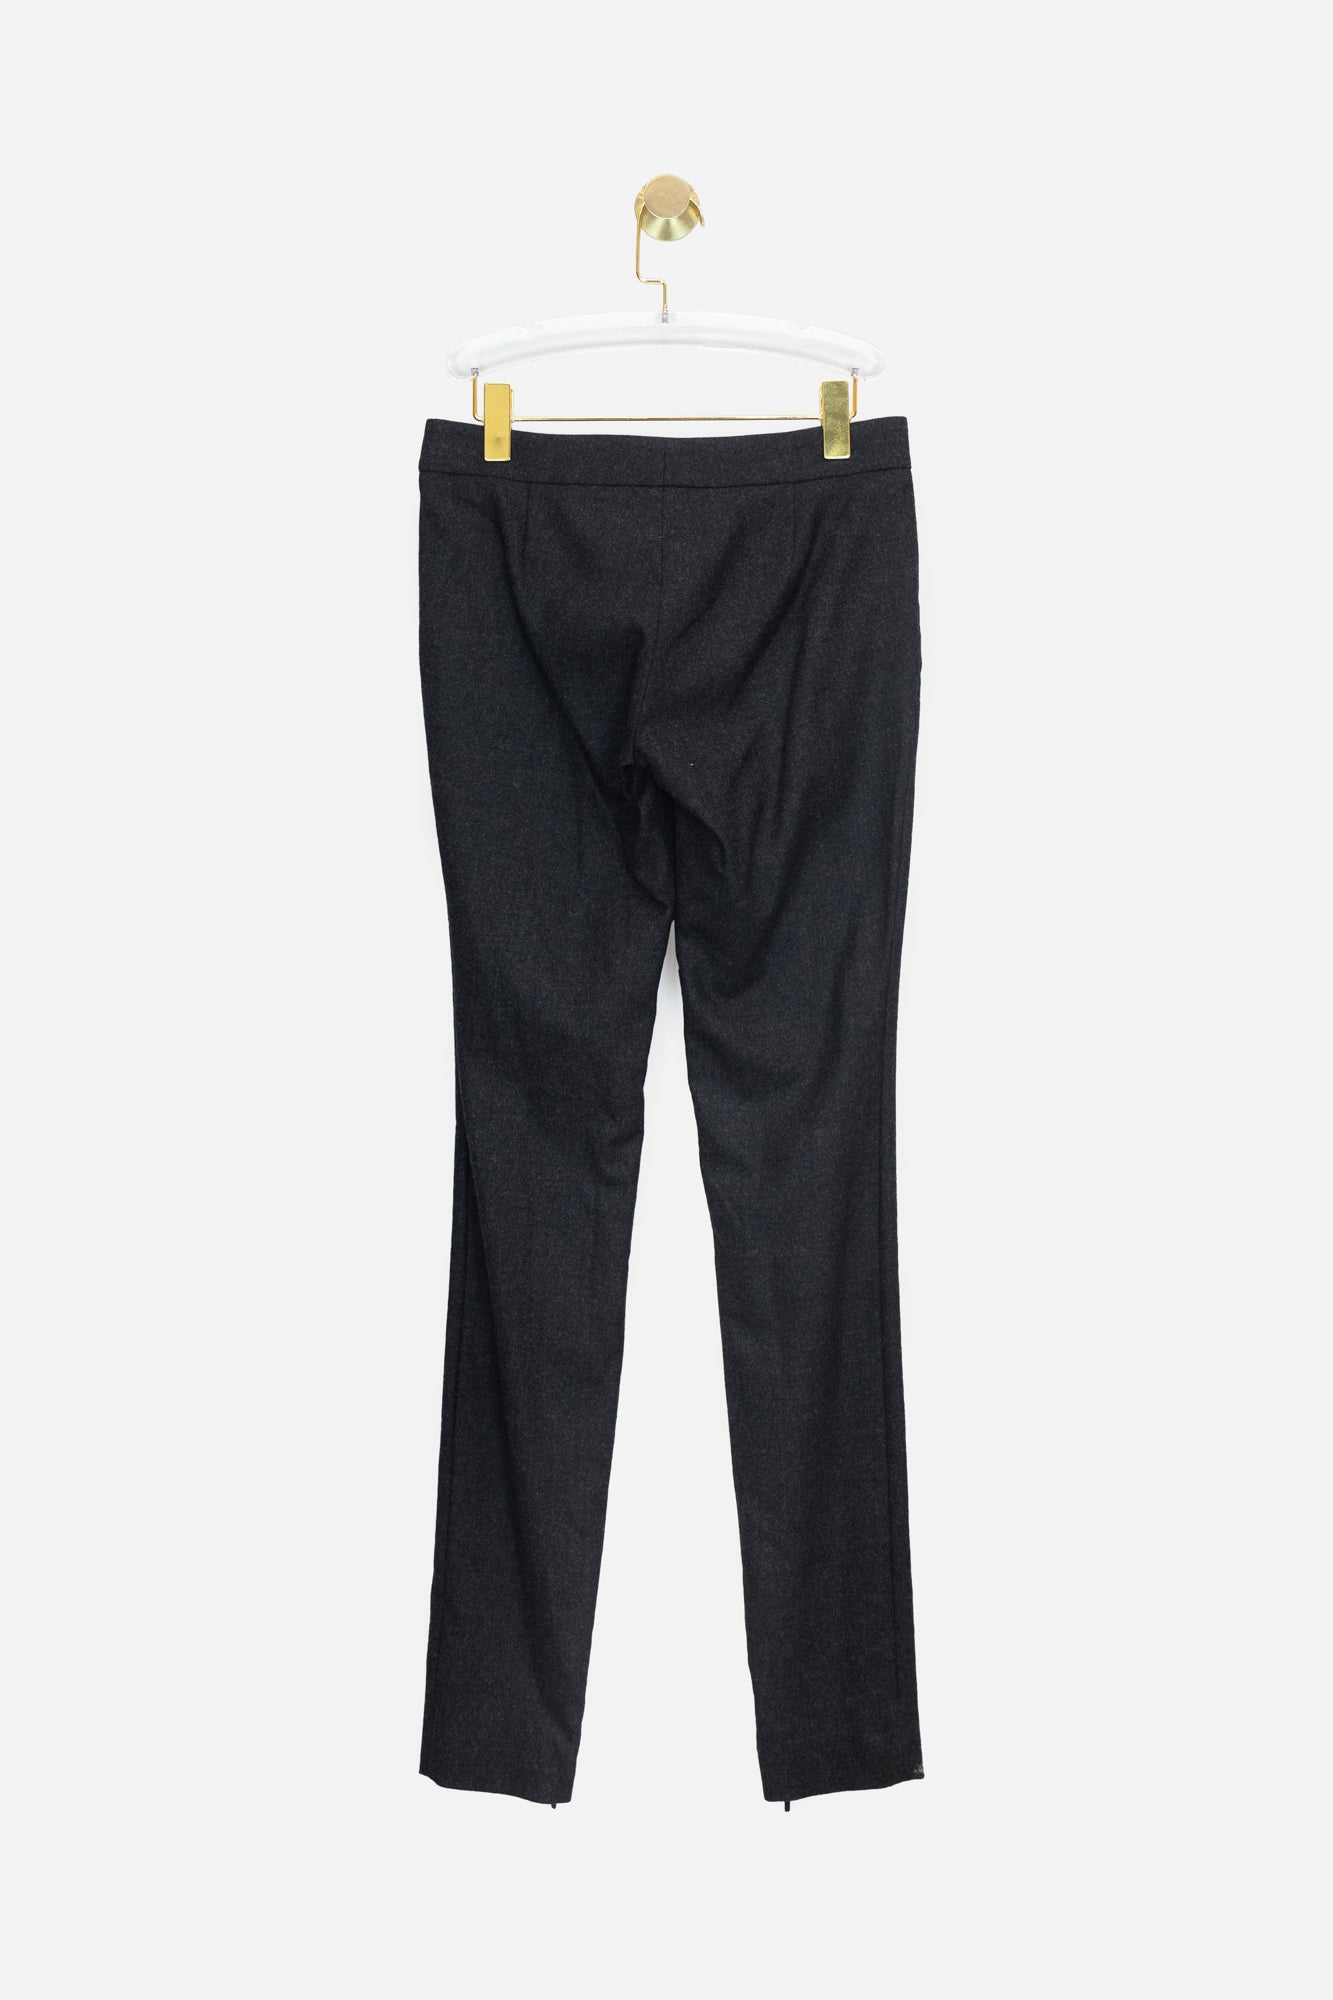 Dark Grey Gucci Trouser With Zipper Ankle And Gold Buckle